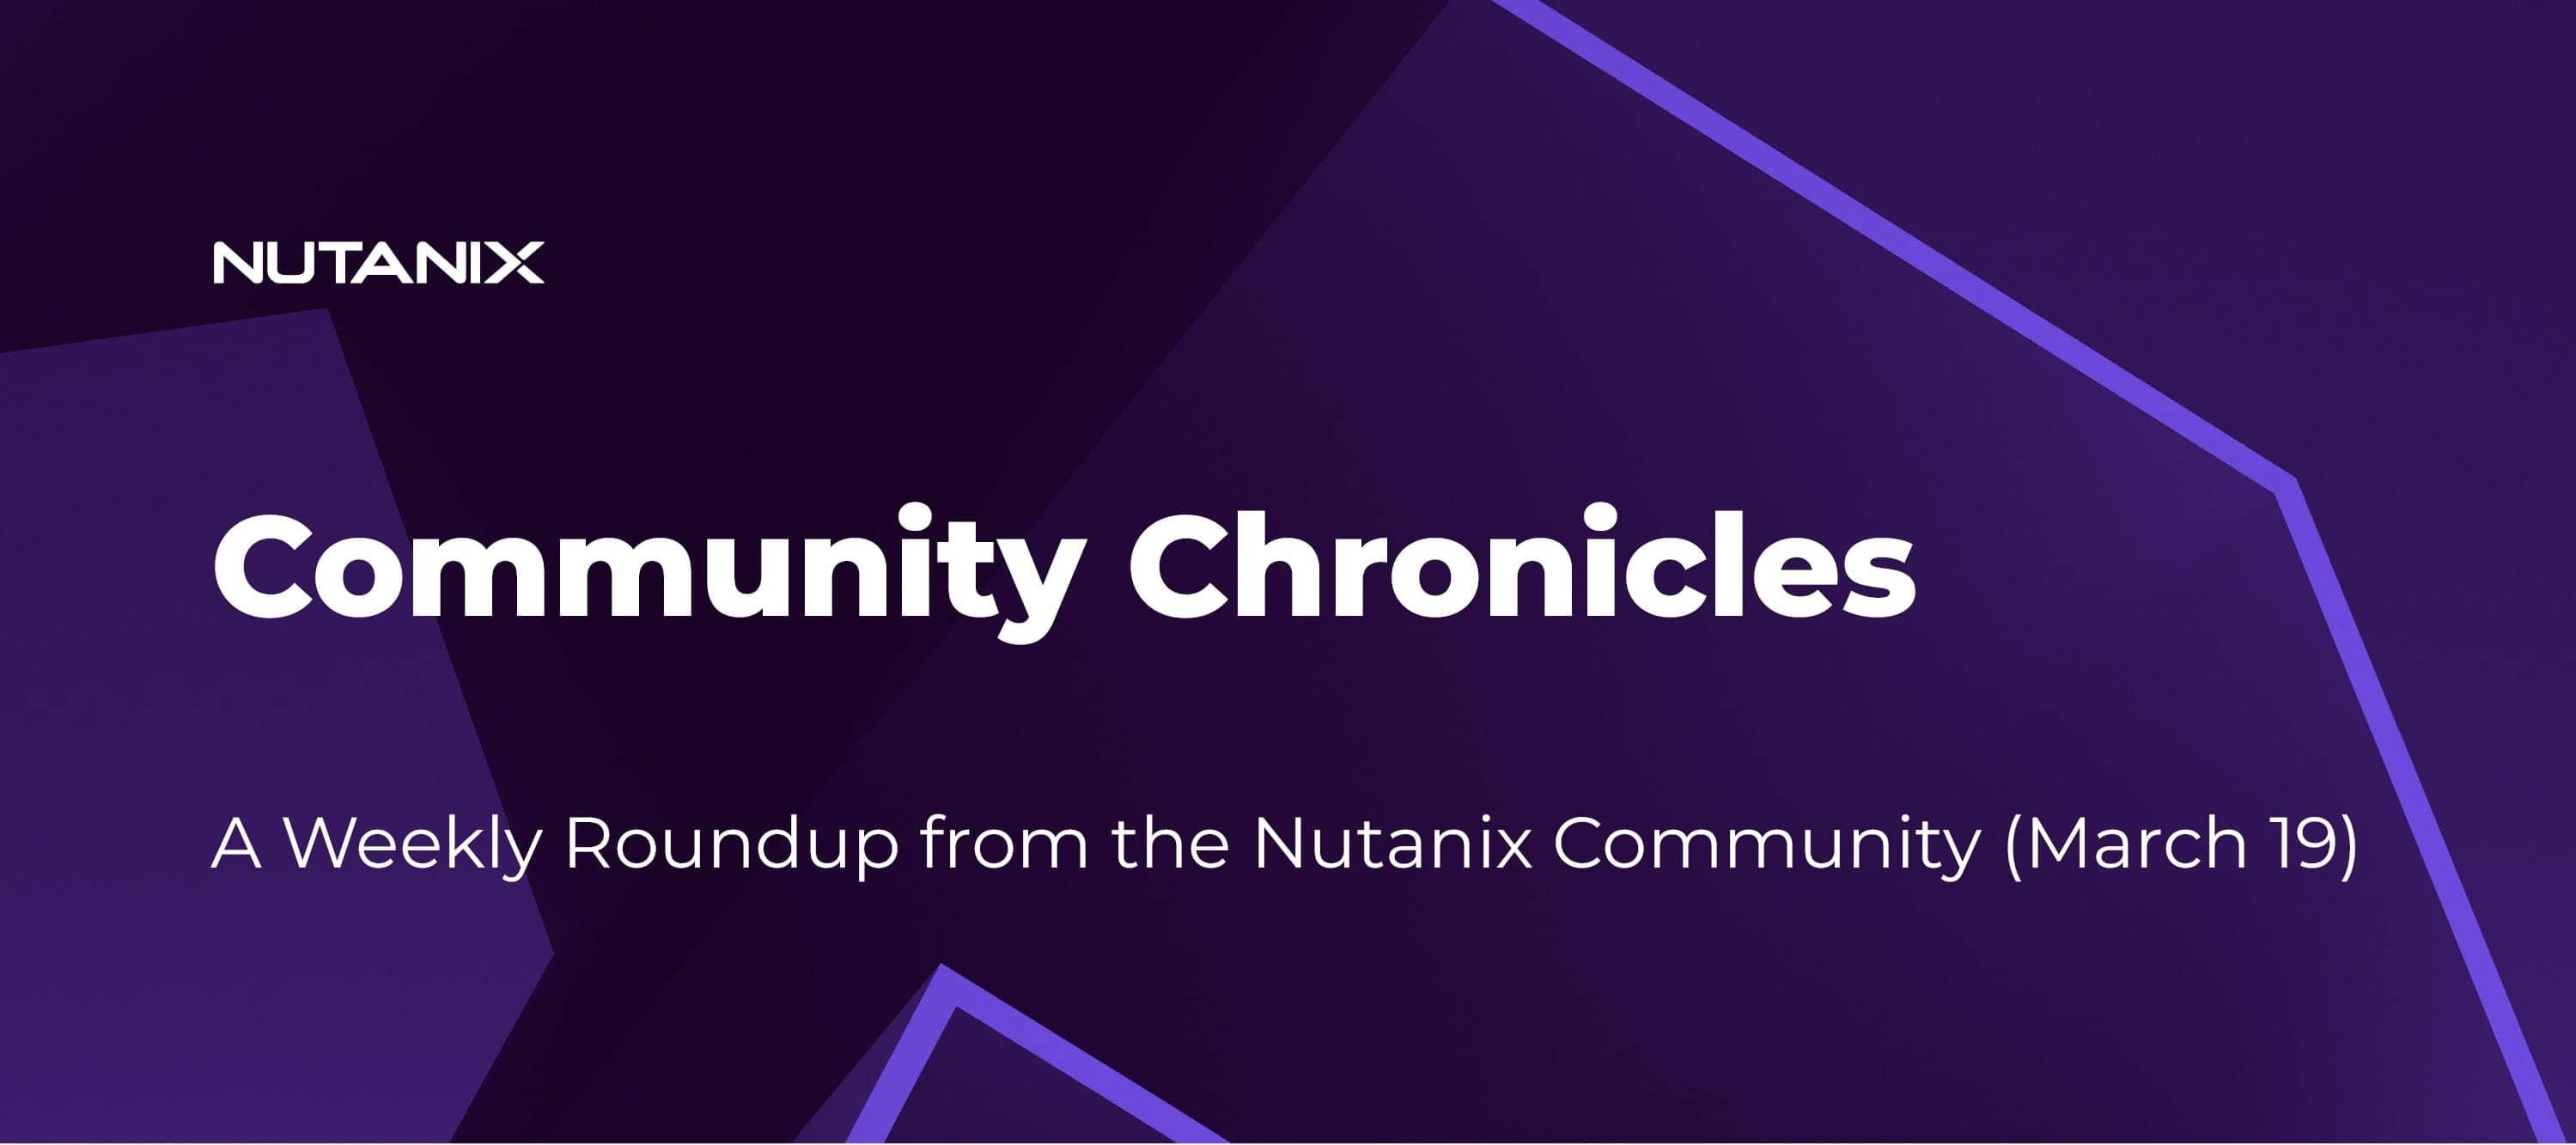 Community Chronicles: A Weekly Roundup from the Nutanix Community (March 19)